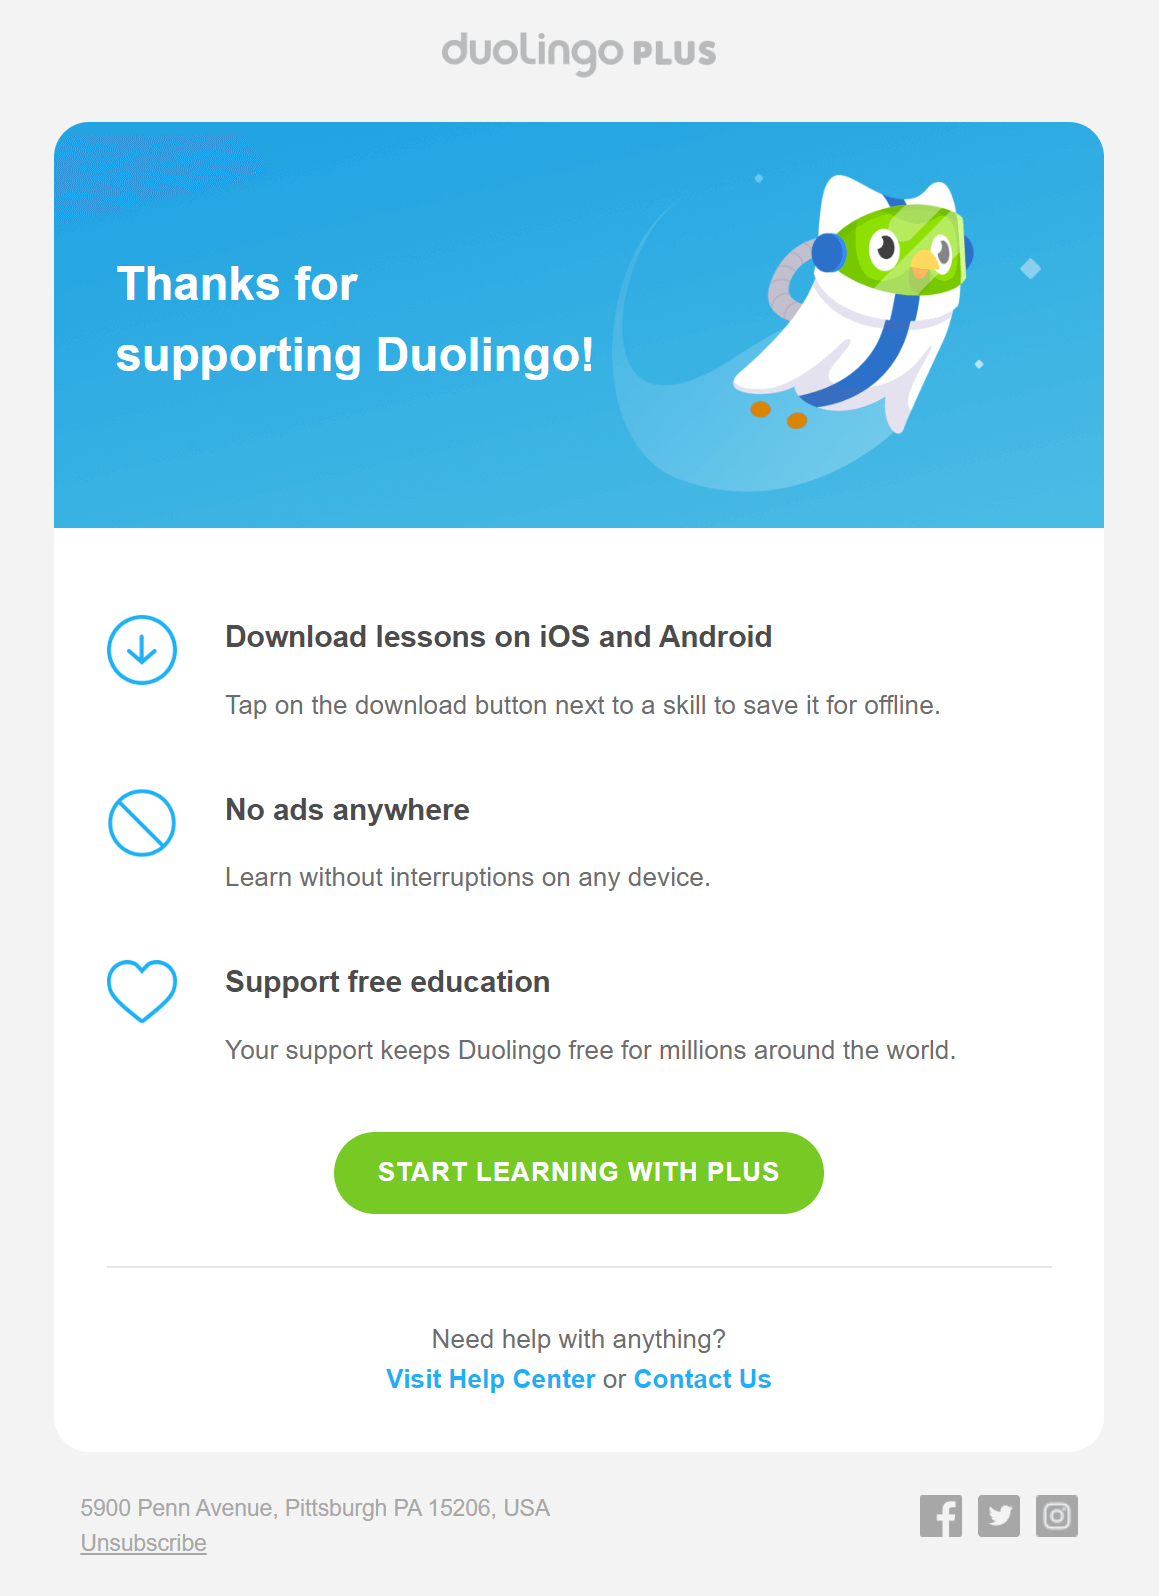 duolingo plus thank you email campaign